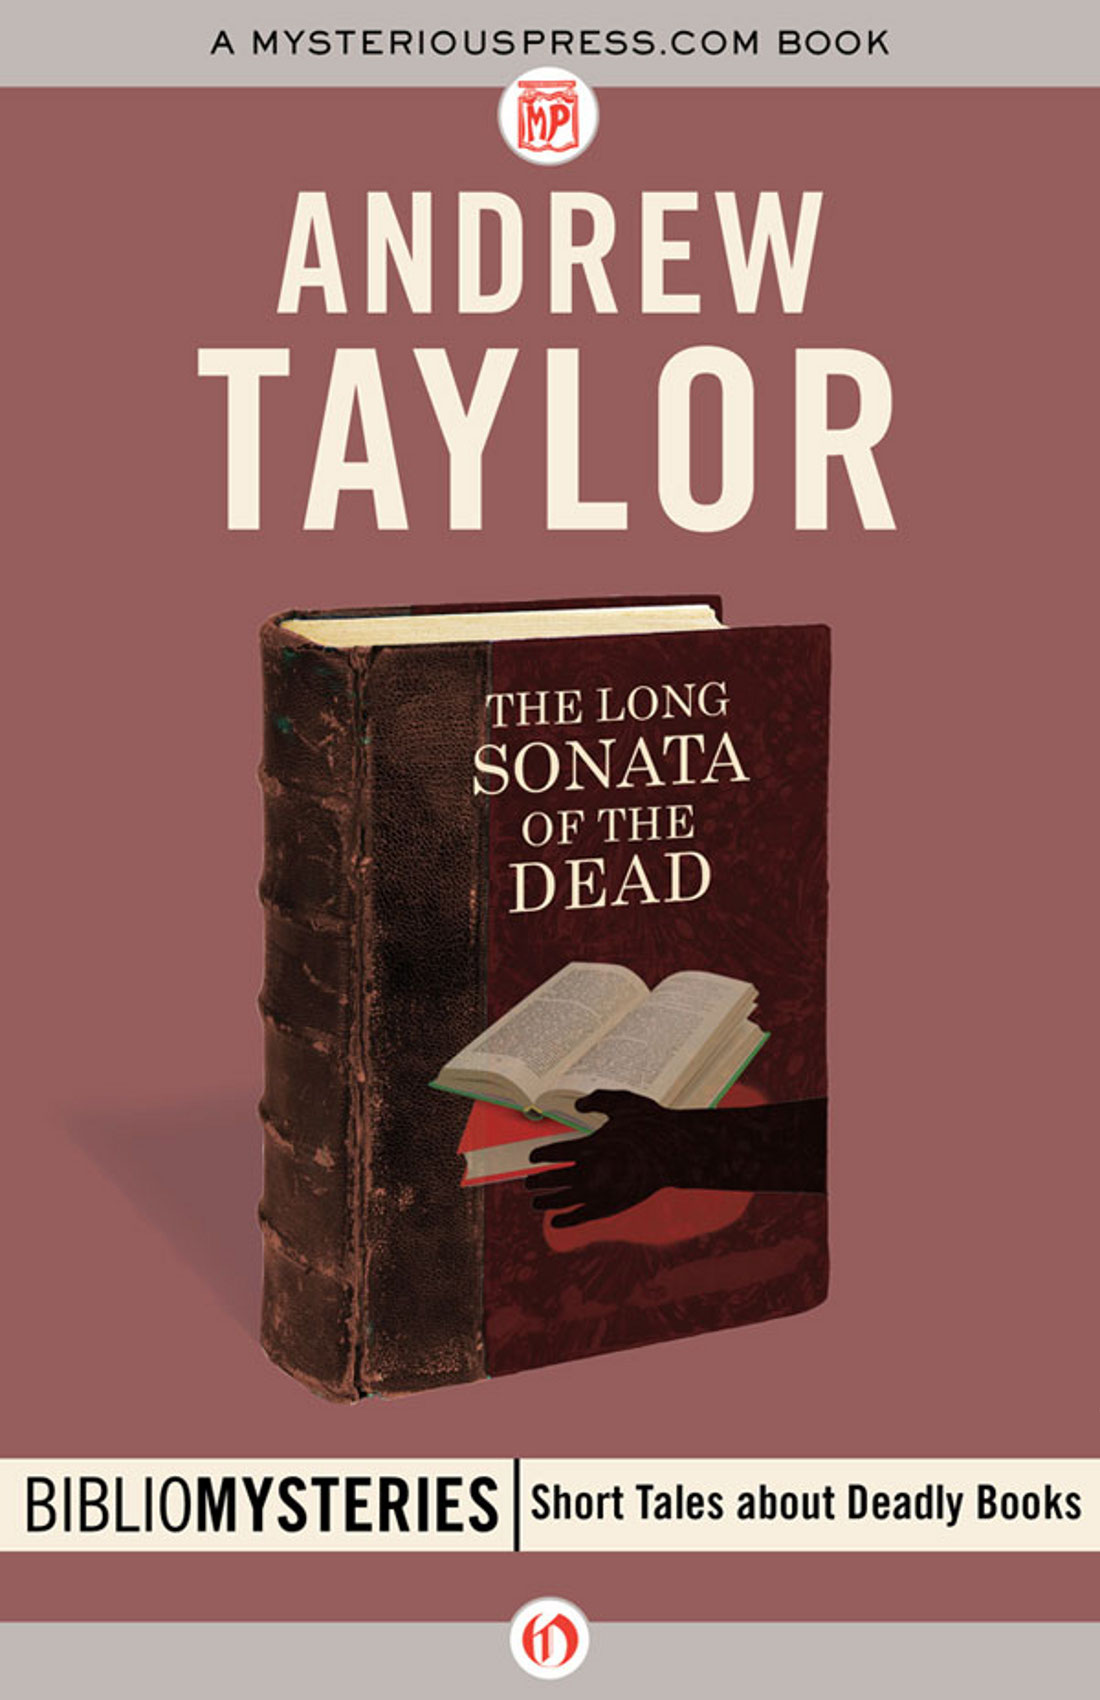 Long Sonata of the Dead by Andrew Taylor